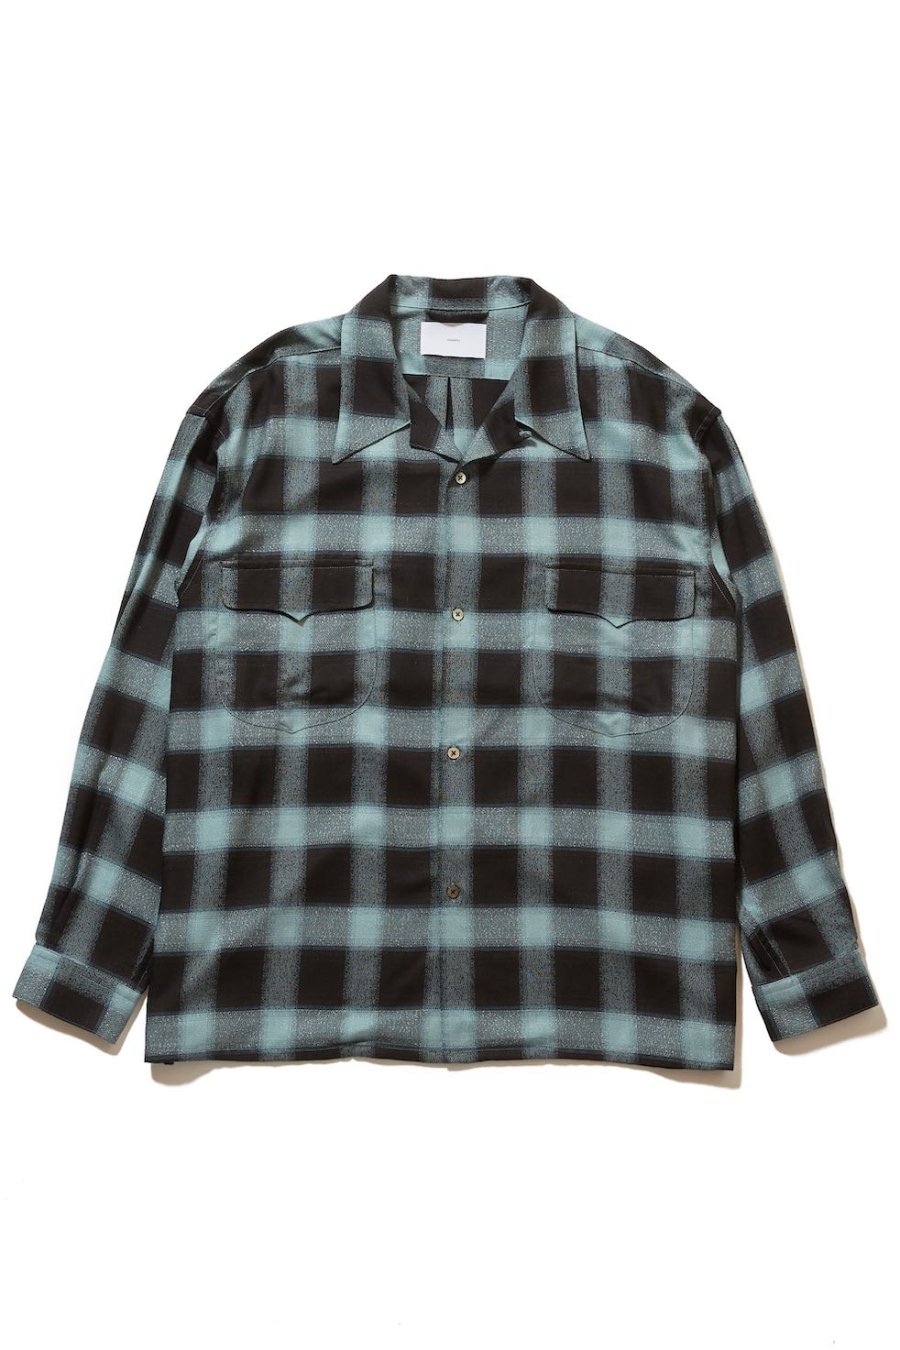 SUGARHILL  OMBRE PLAID OPEN COLLAR BLOUSE(TURQUOISE)<img class='new_mark_img2' src='https://img.shop-pro.jp/img/new/icons15.gif' style='border:none;display:inline;margin:0px;padding:0px;width:auto;' />